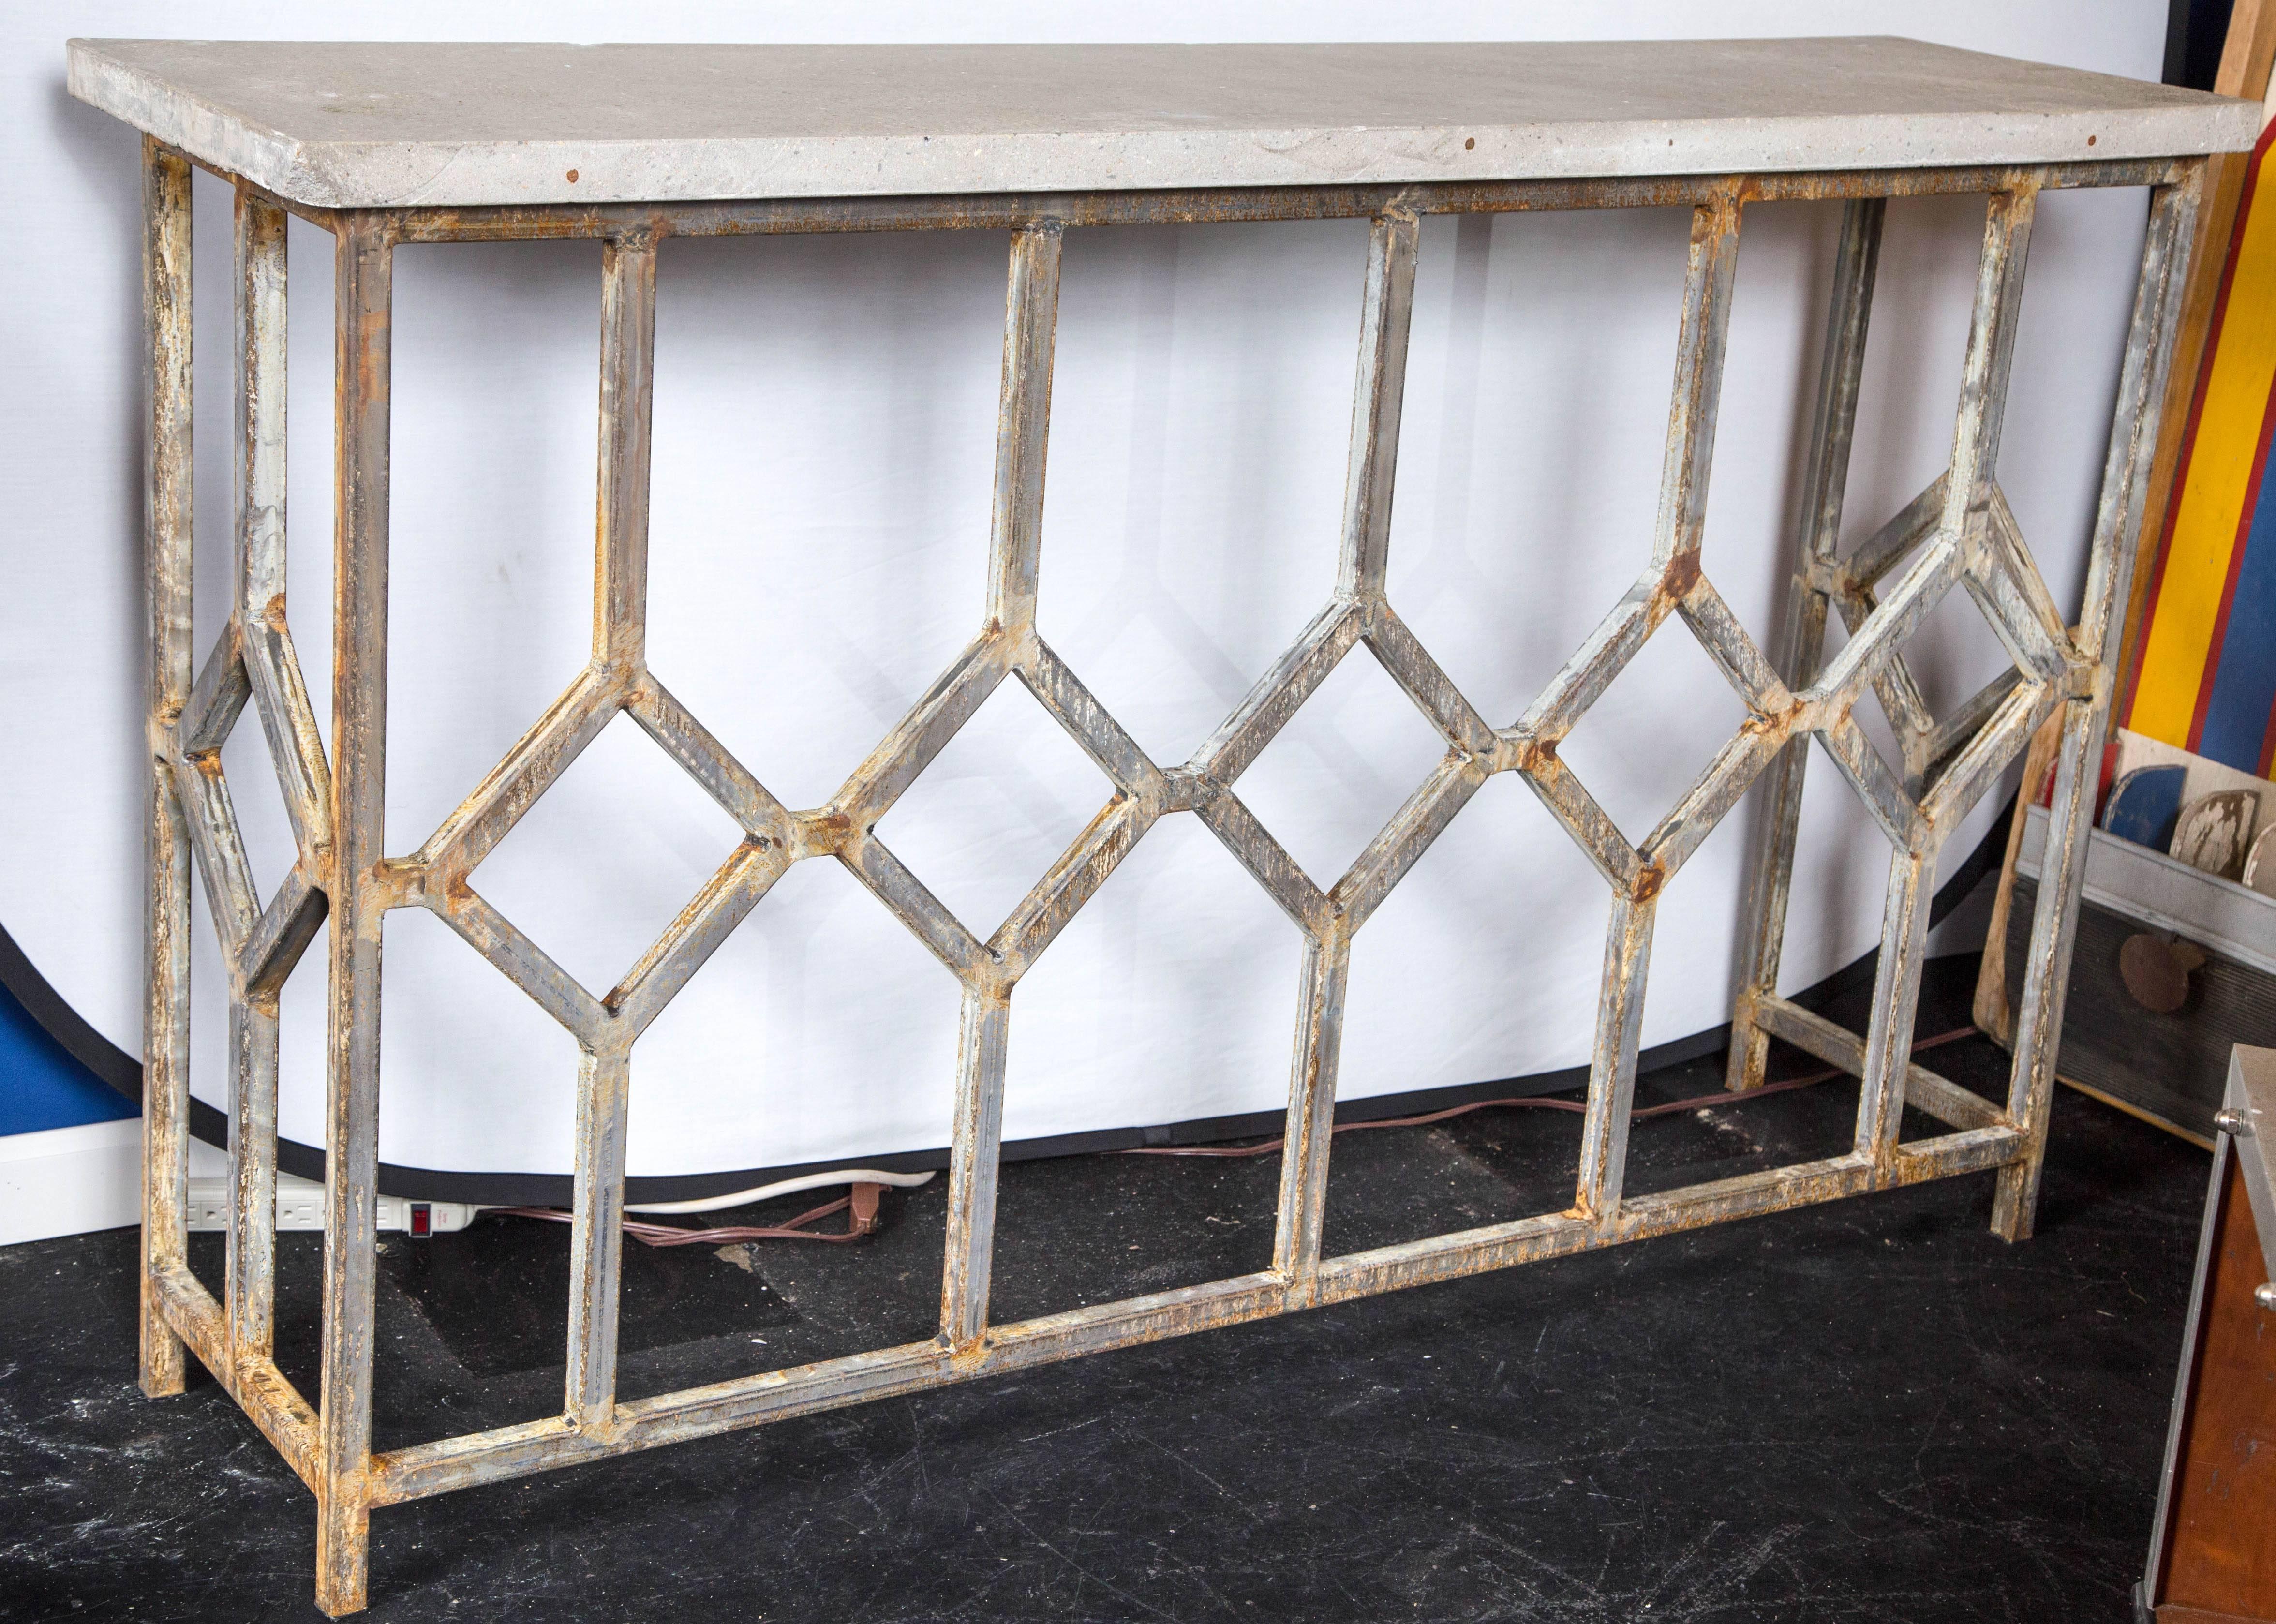 A unique hallway console table made from welded square steel tubing in an intricate pattern reminiscent of the deco period. The top is polished cement with minor imperfections.